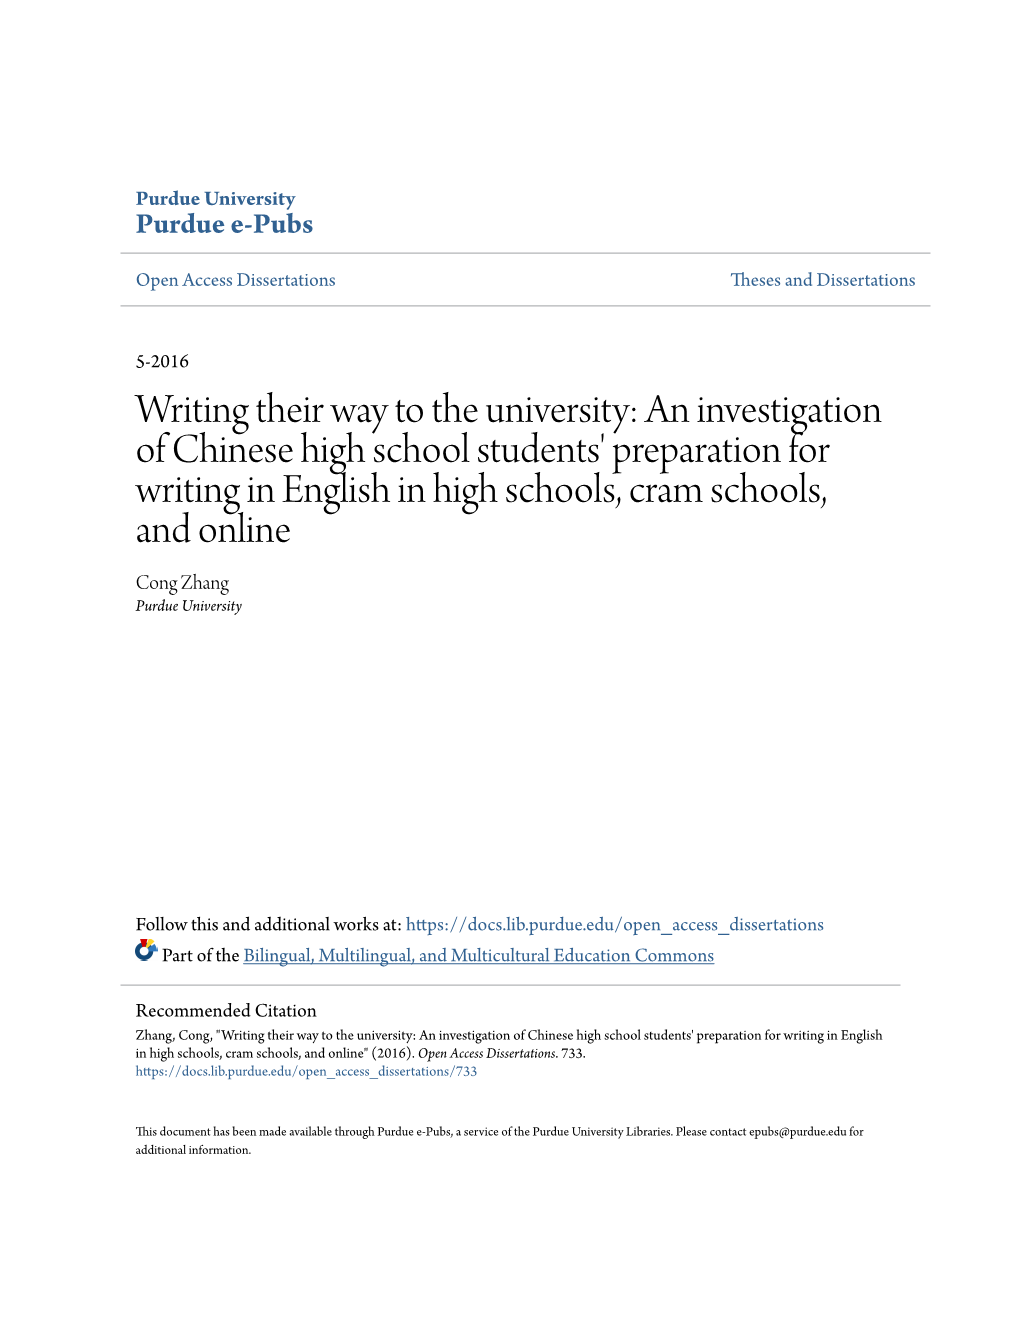 An Investigation of Chinese High School Students' Preparation for Writing in English in High Schools, Cram Schools, and Online Cong Zhang Purdue University